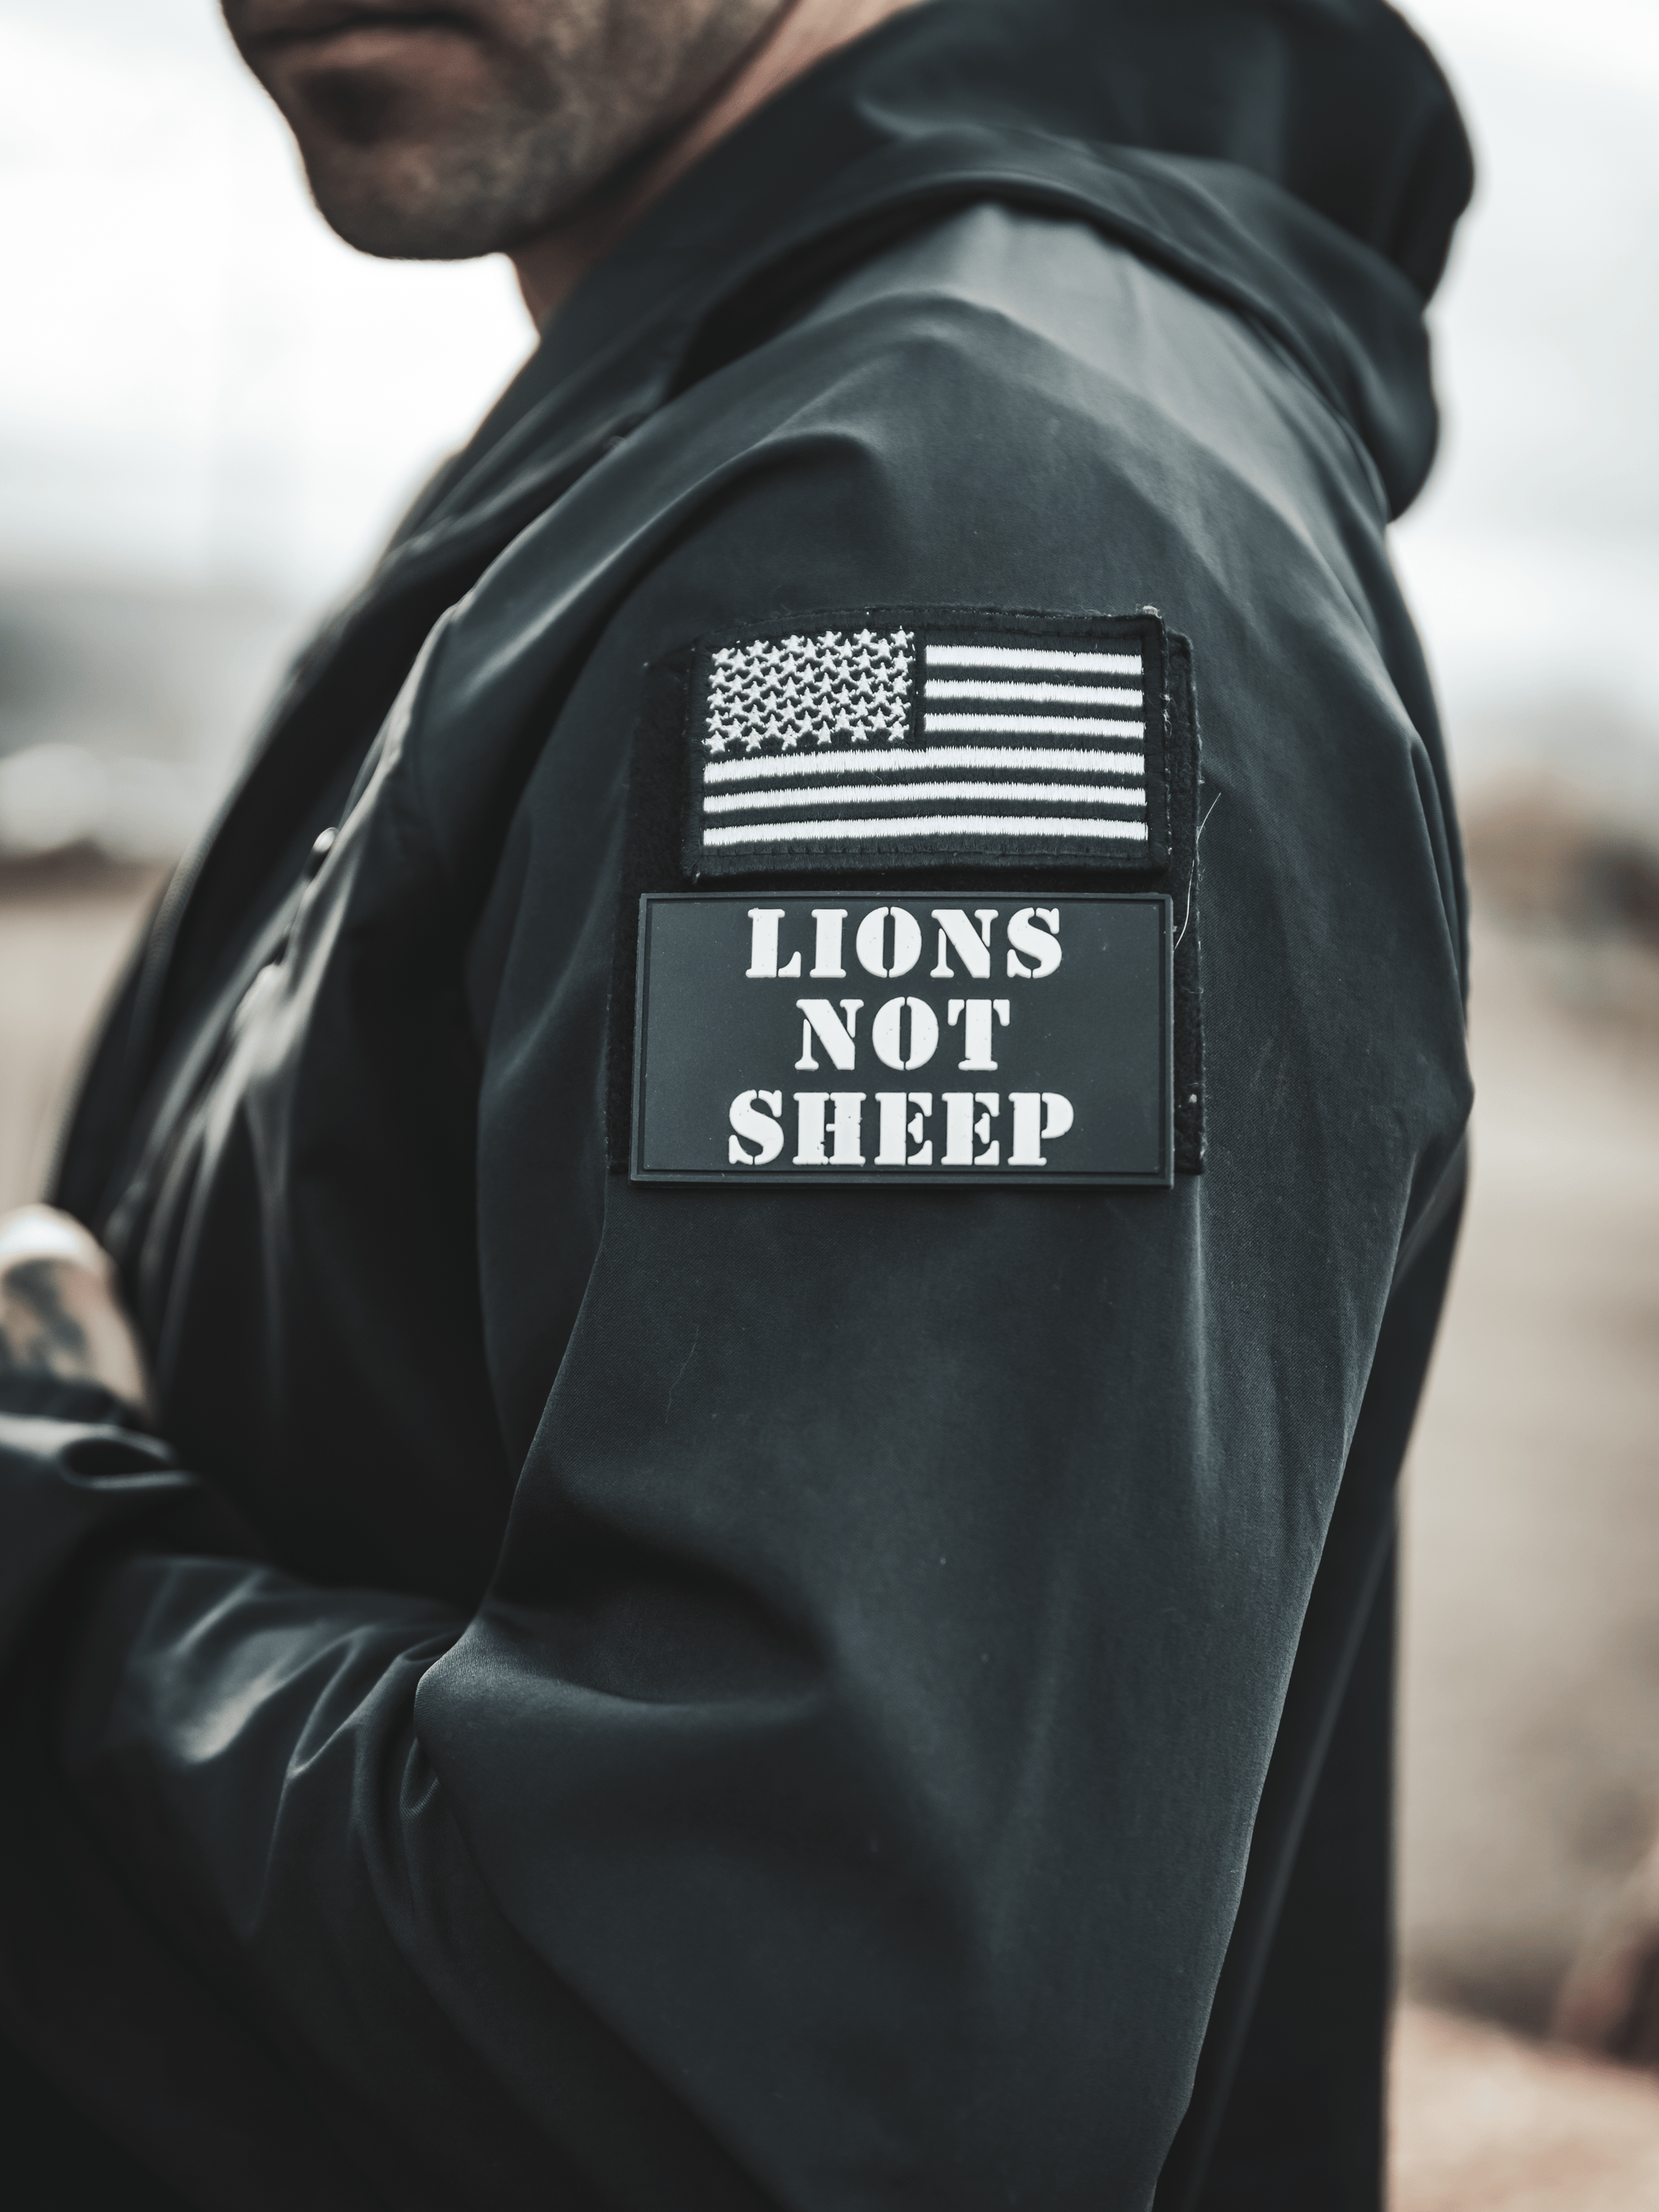 Lions Not Sheep "OG" PVC Patch (Velcro Backing) - Lions Not Sheep ®